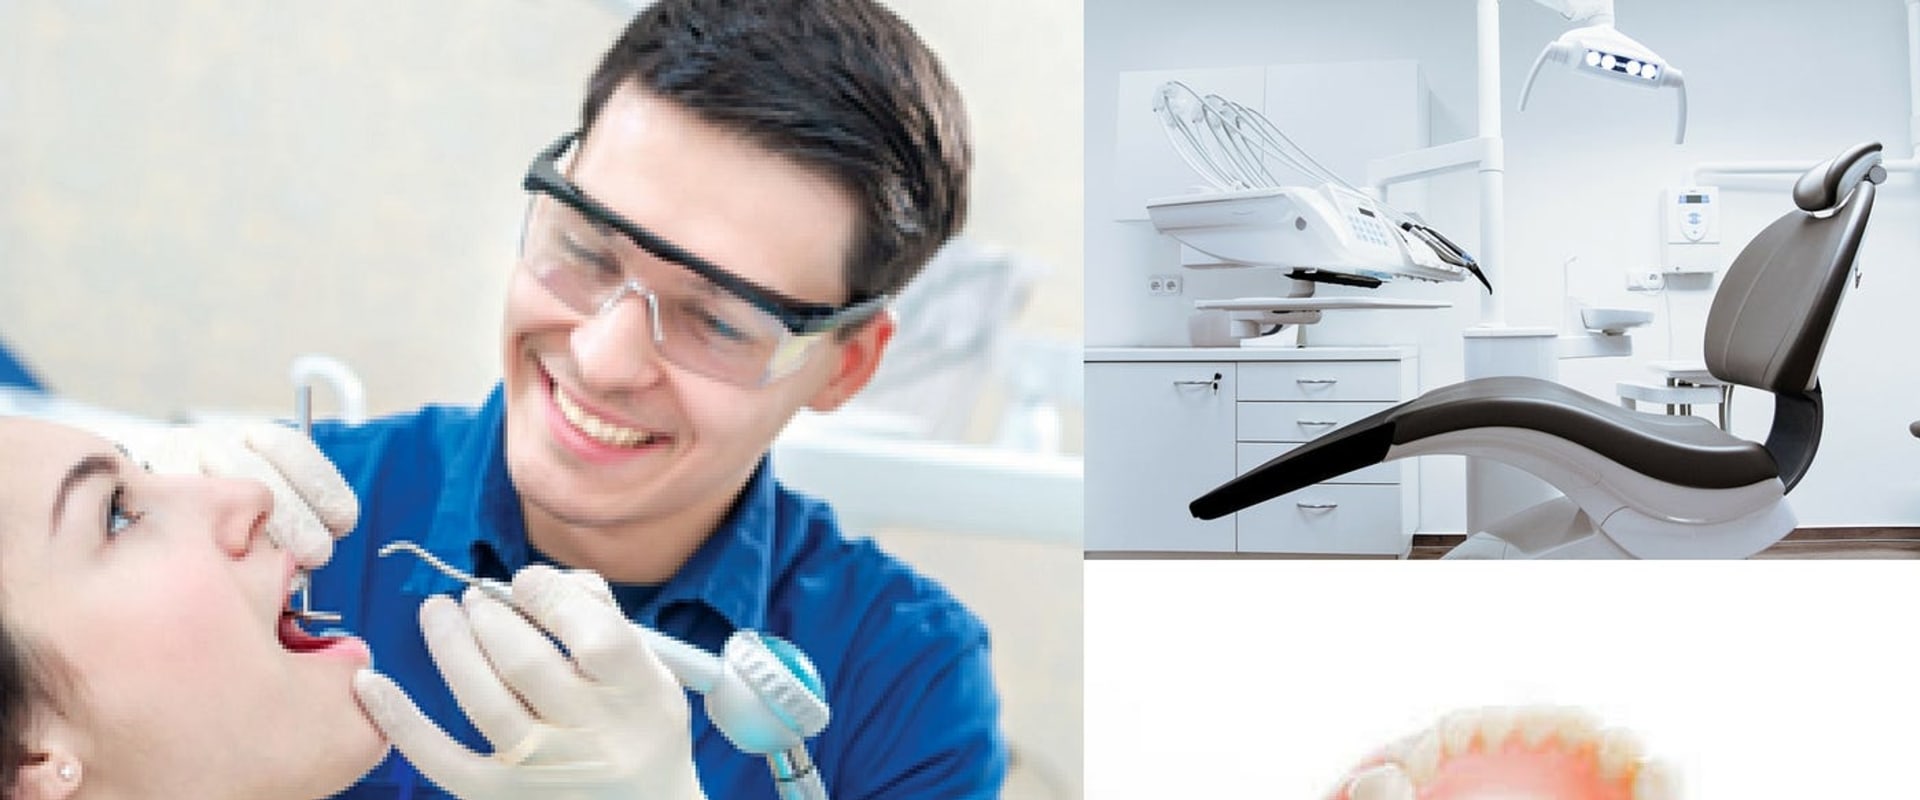 Tips for Finding a Reliable Dentist for Your Procedure